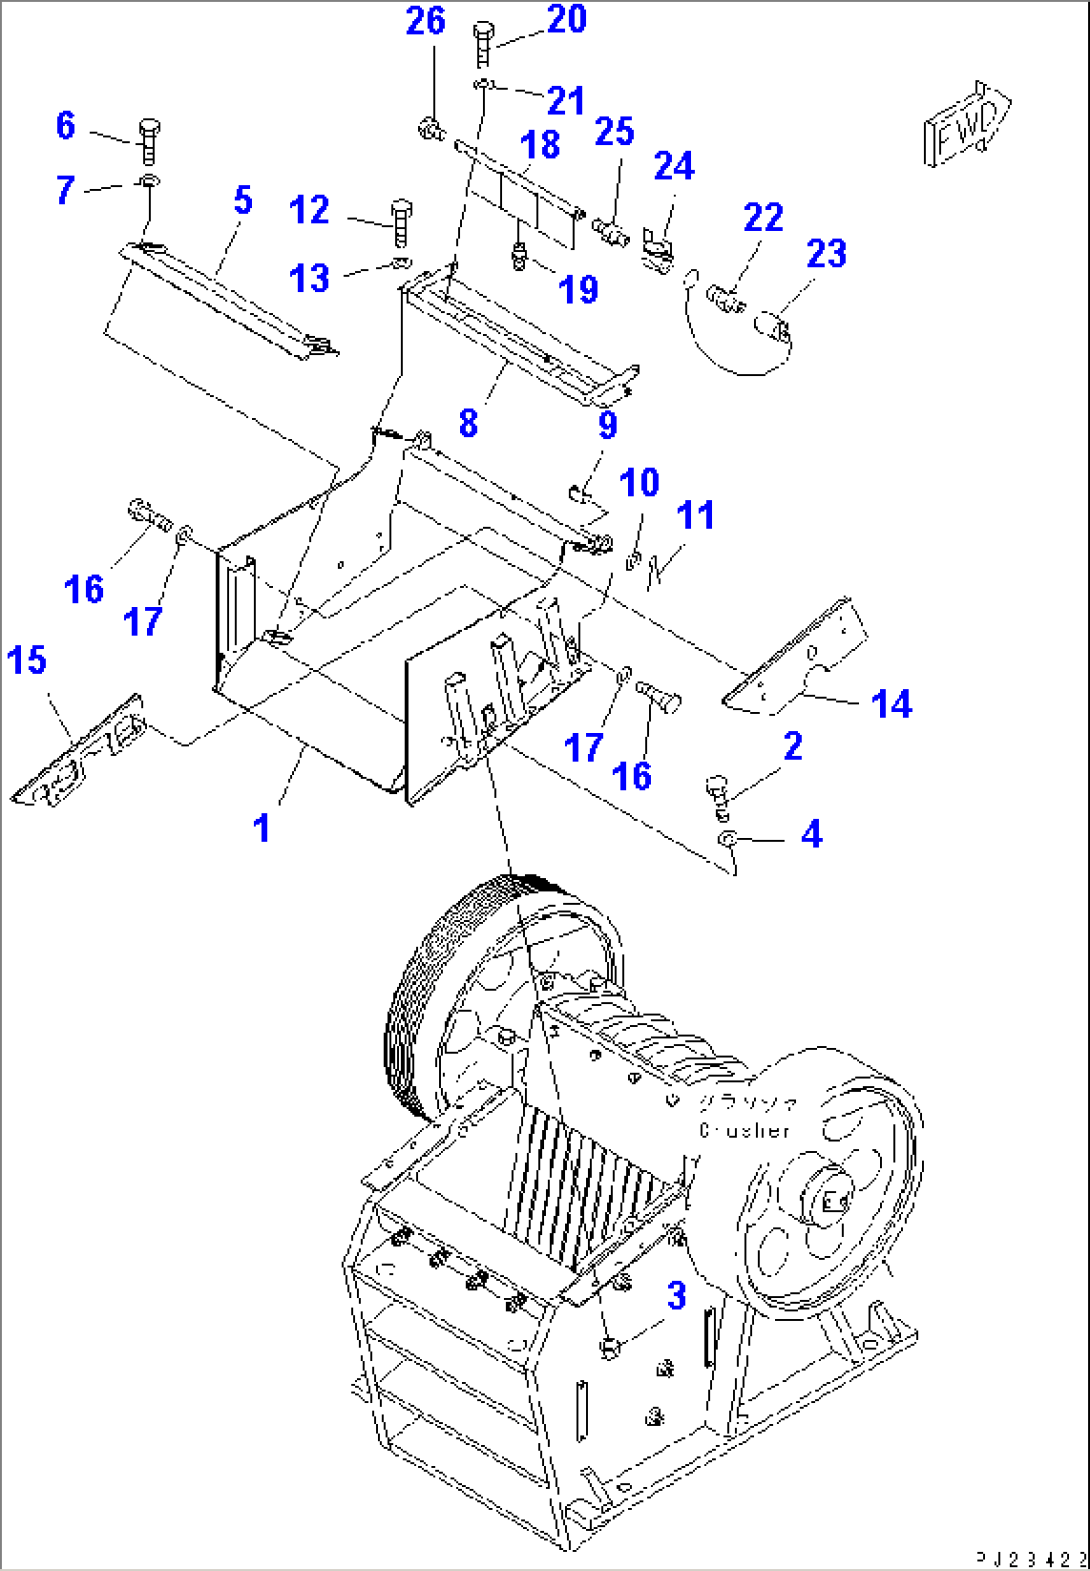 CRUSHER (GUARD AND WATER SPRINKLING NOZZLE)(#1501-)